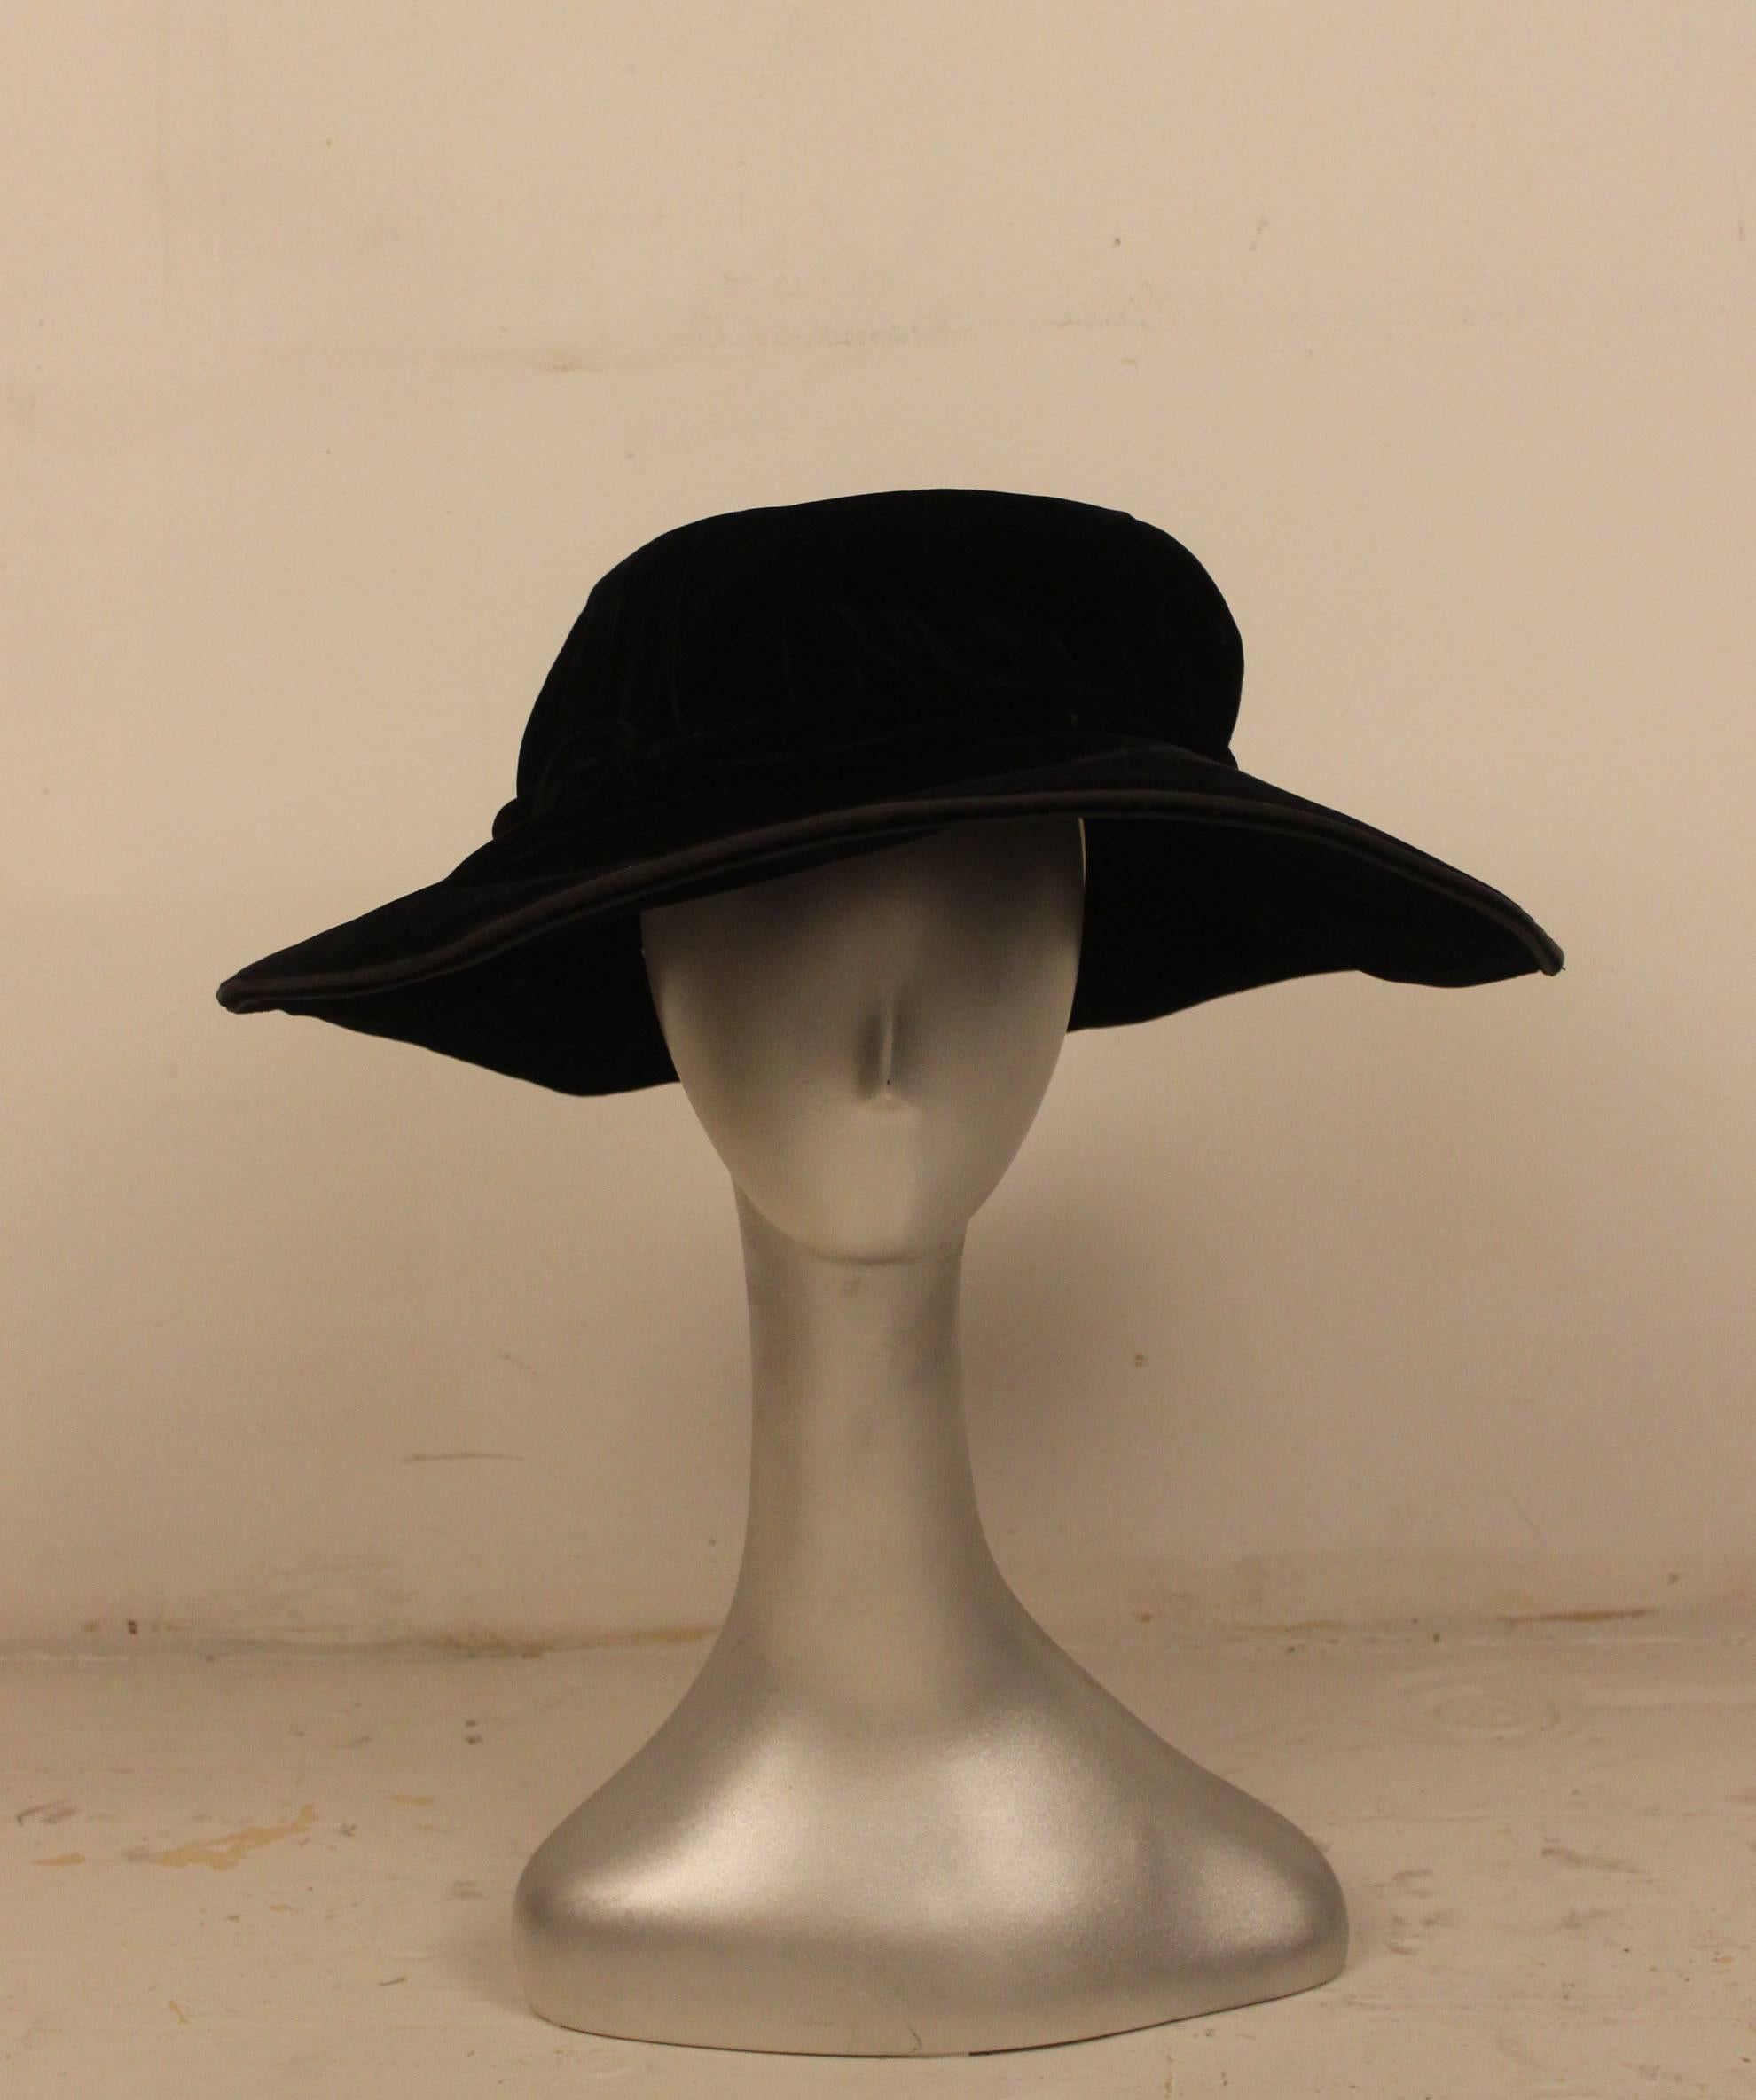 H.C.F. Koch and Company opened in 1891 in what is now Manhattan's West Village. It 1890 Henry Koch made a bold move opening a grand emporium on 125th St. selling the finest in womens fashion and imported millinery. This beautiful velvet hat is from